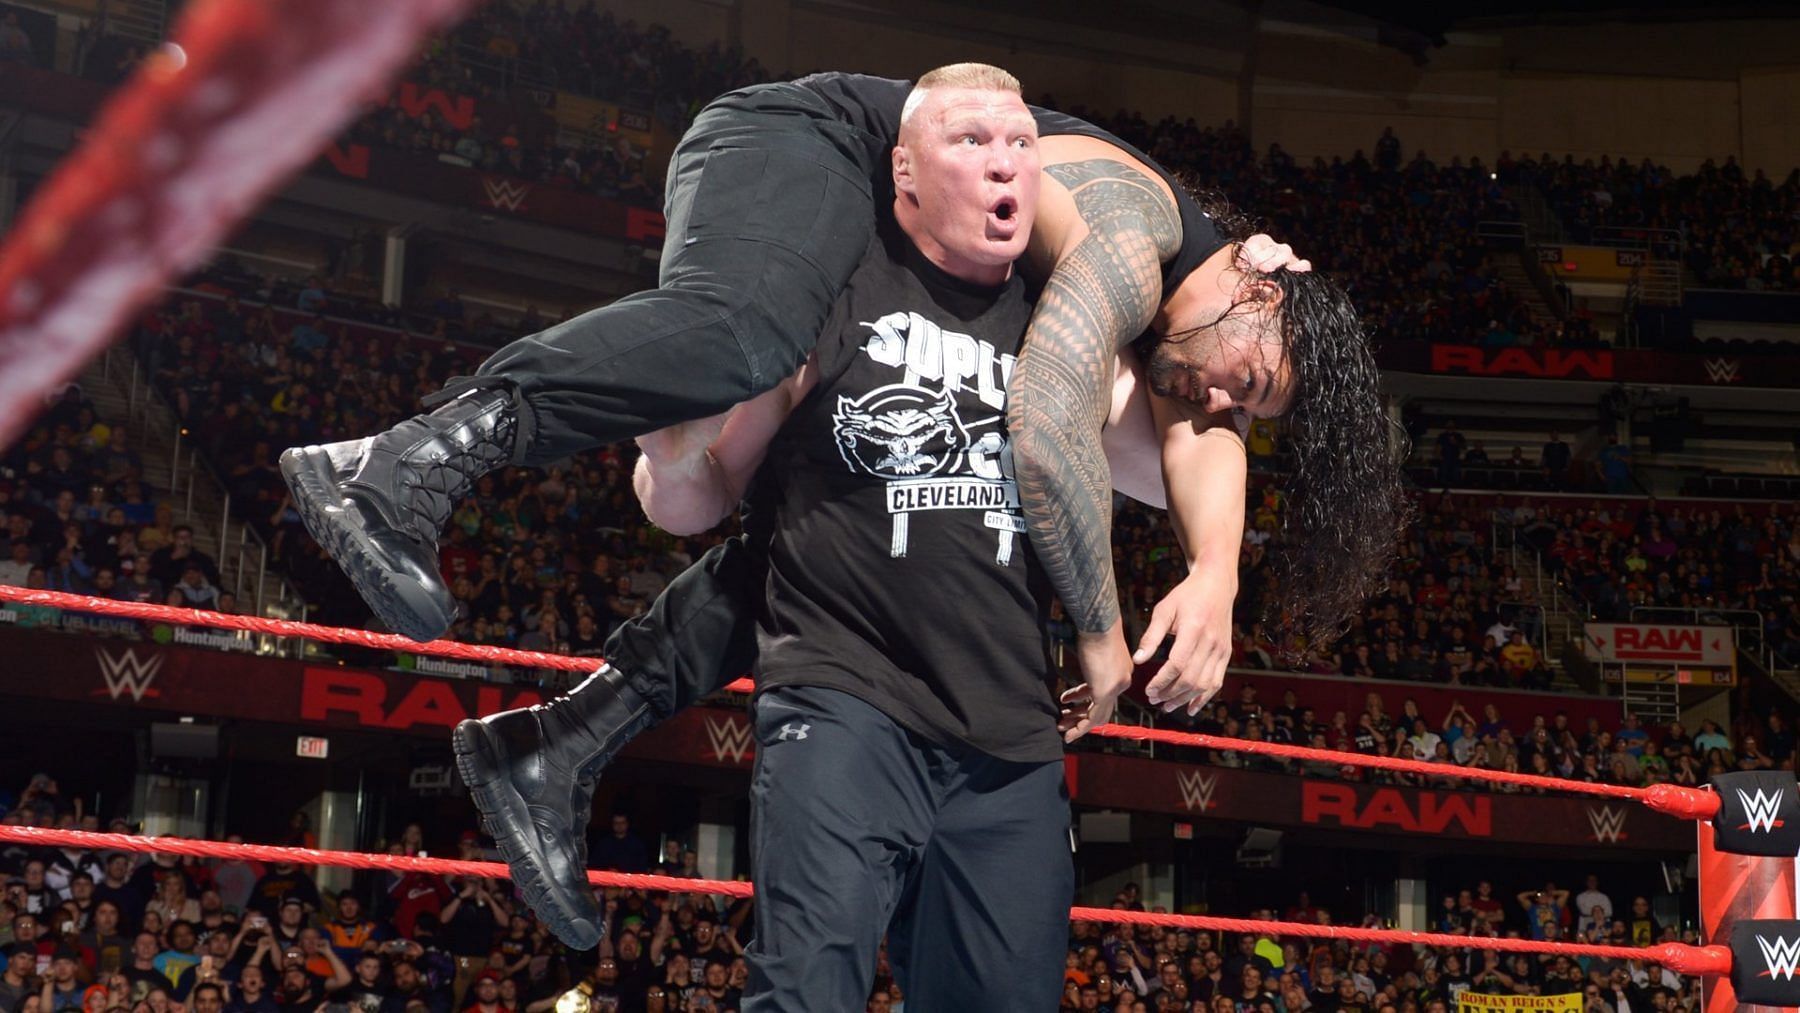 Roman Reigns and Brock Lesnar could headline WrestleMania 38.